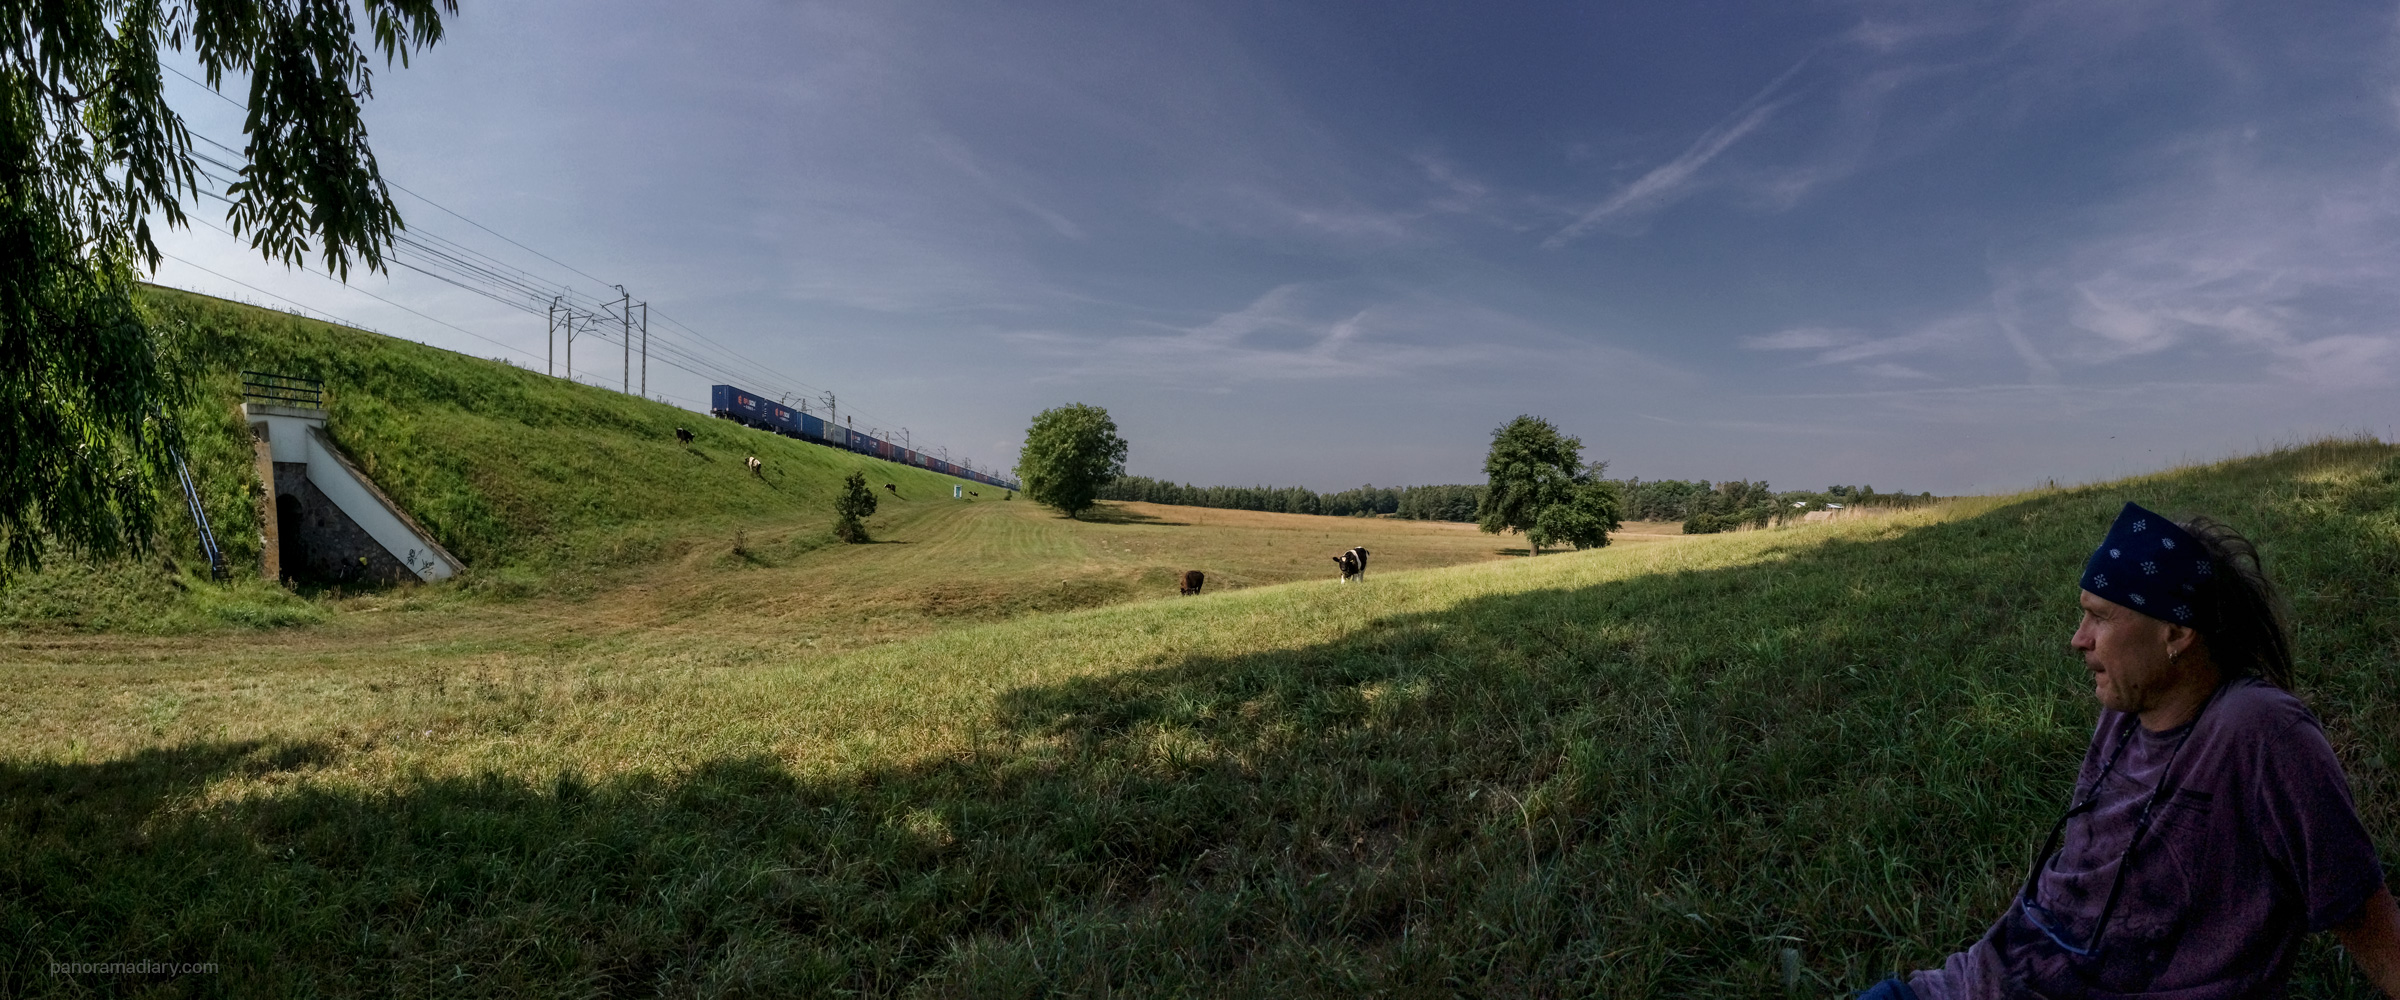 Cows and trains | PANORAMA DIARY